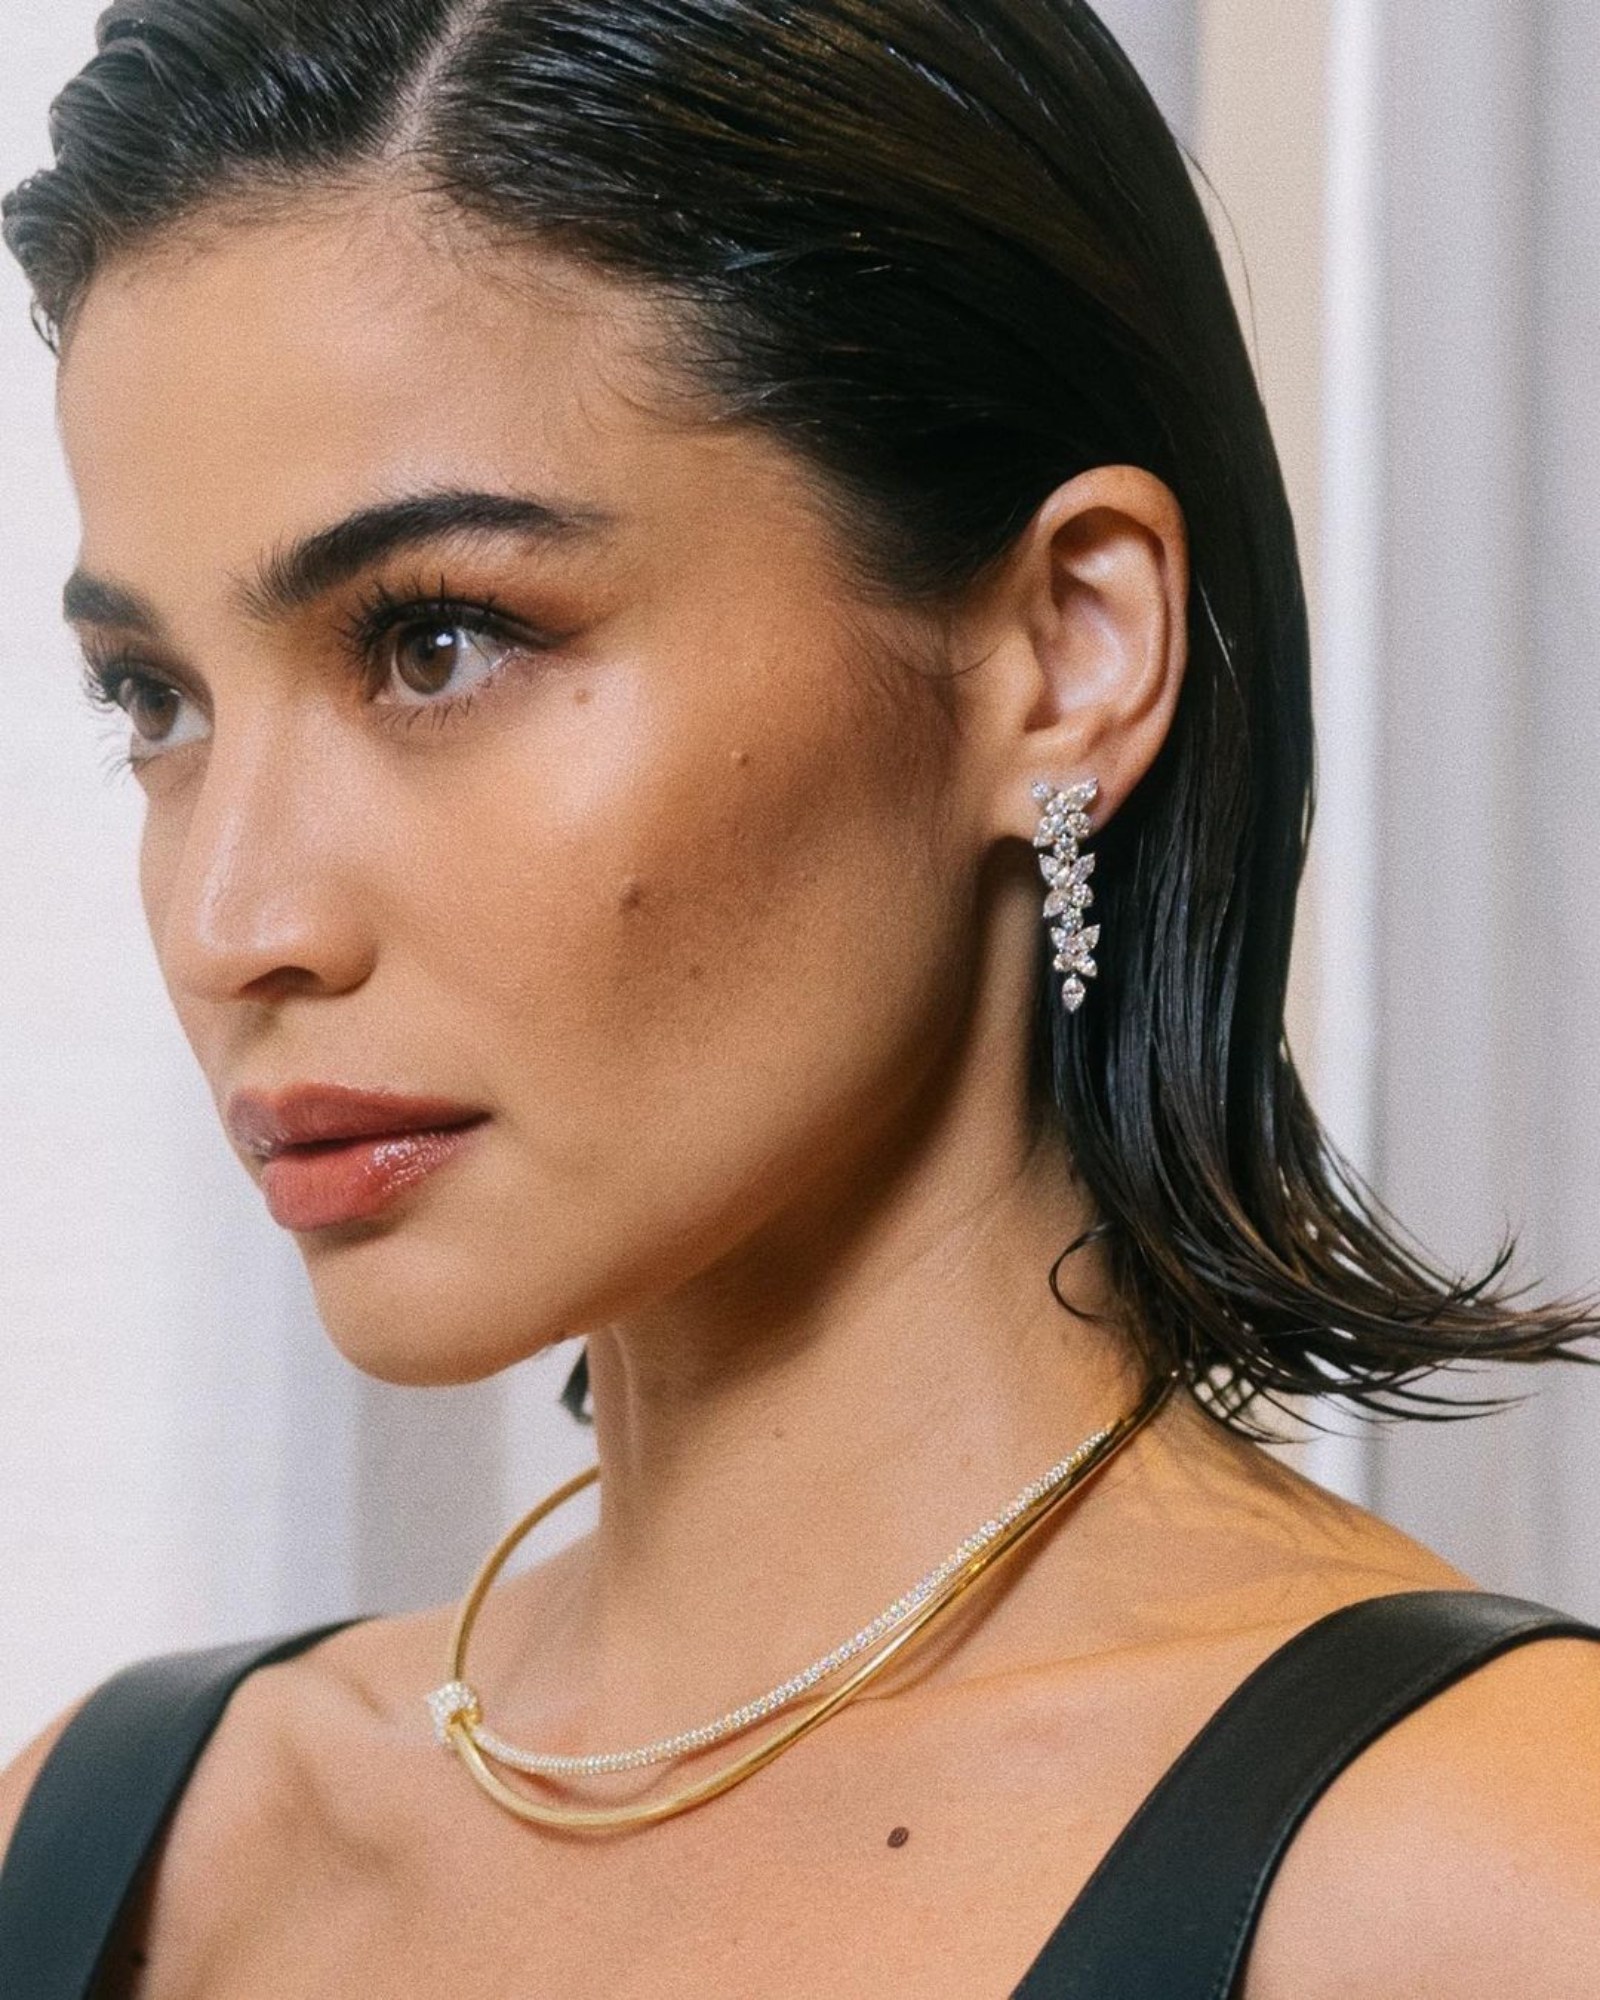 8 Fresh Ways To Style Short Hair, According To Anne Curtis